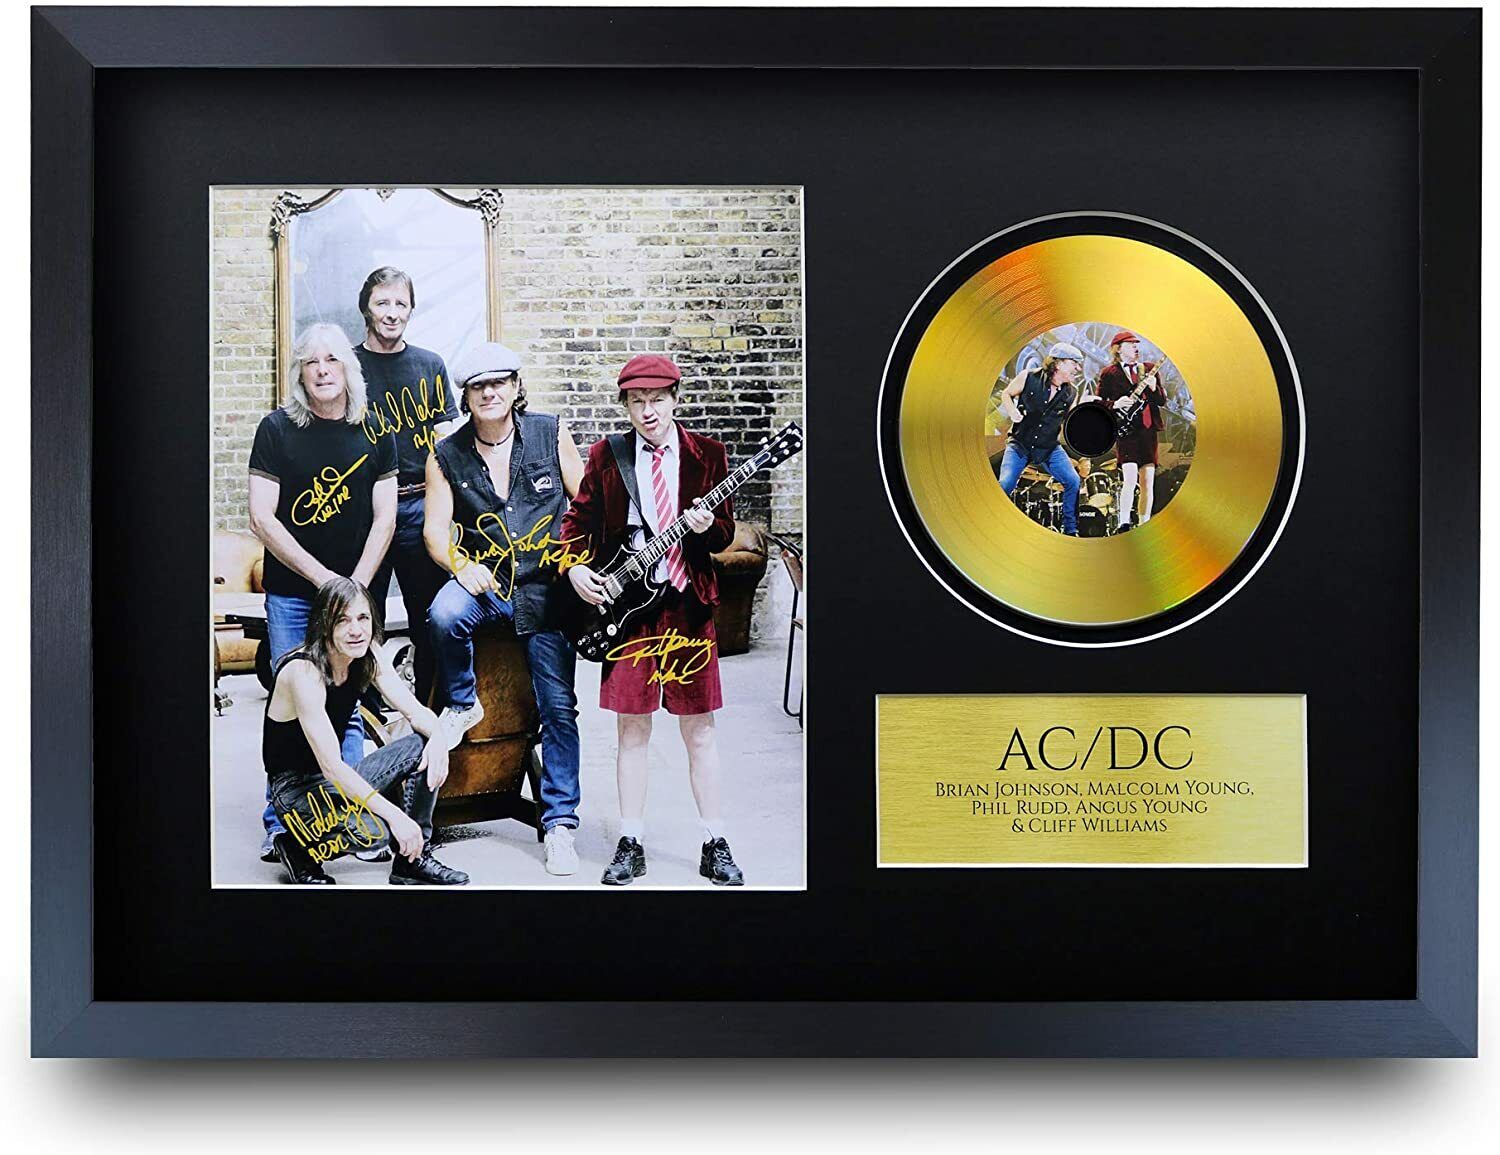 ACDC A3 Framed Gift Idea Signed Autograph Picture Printed Gold Disc a Music Fans